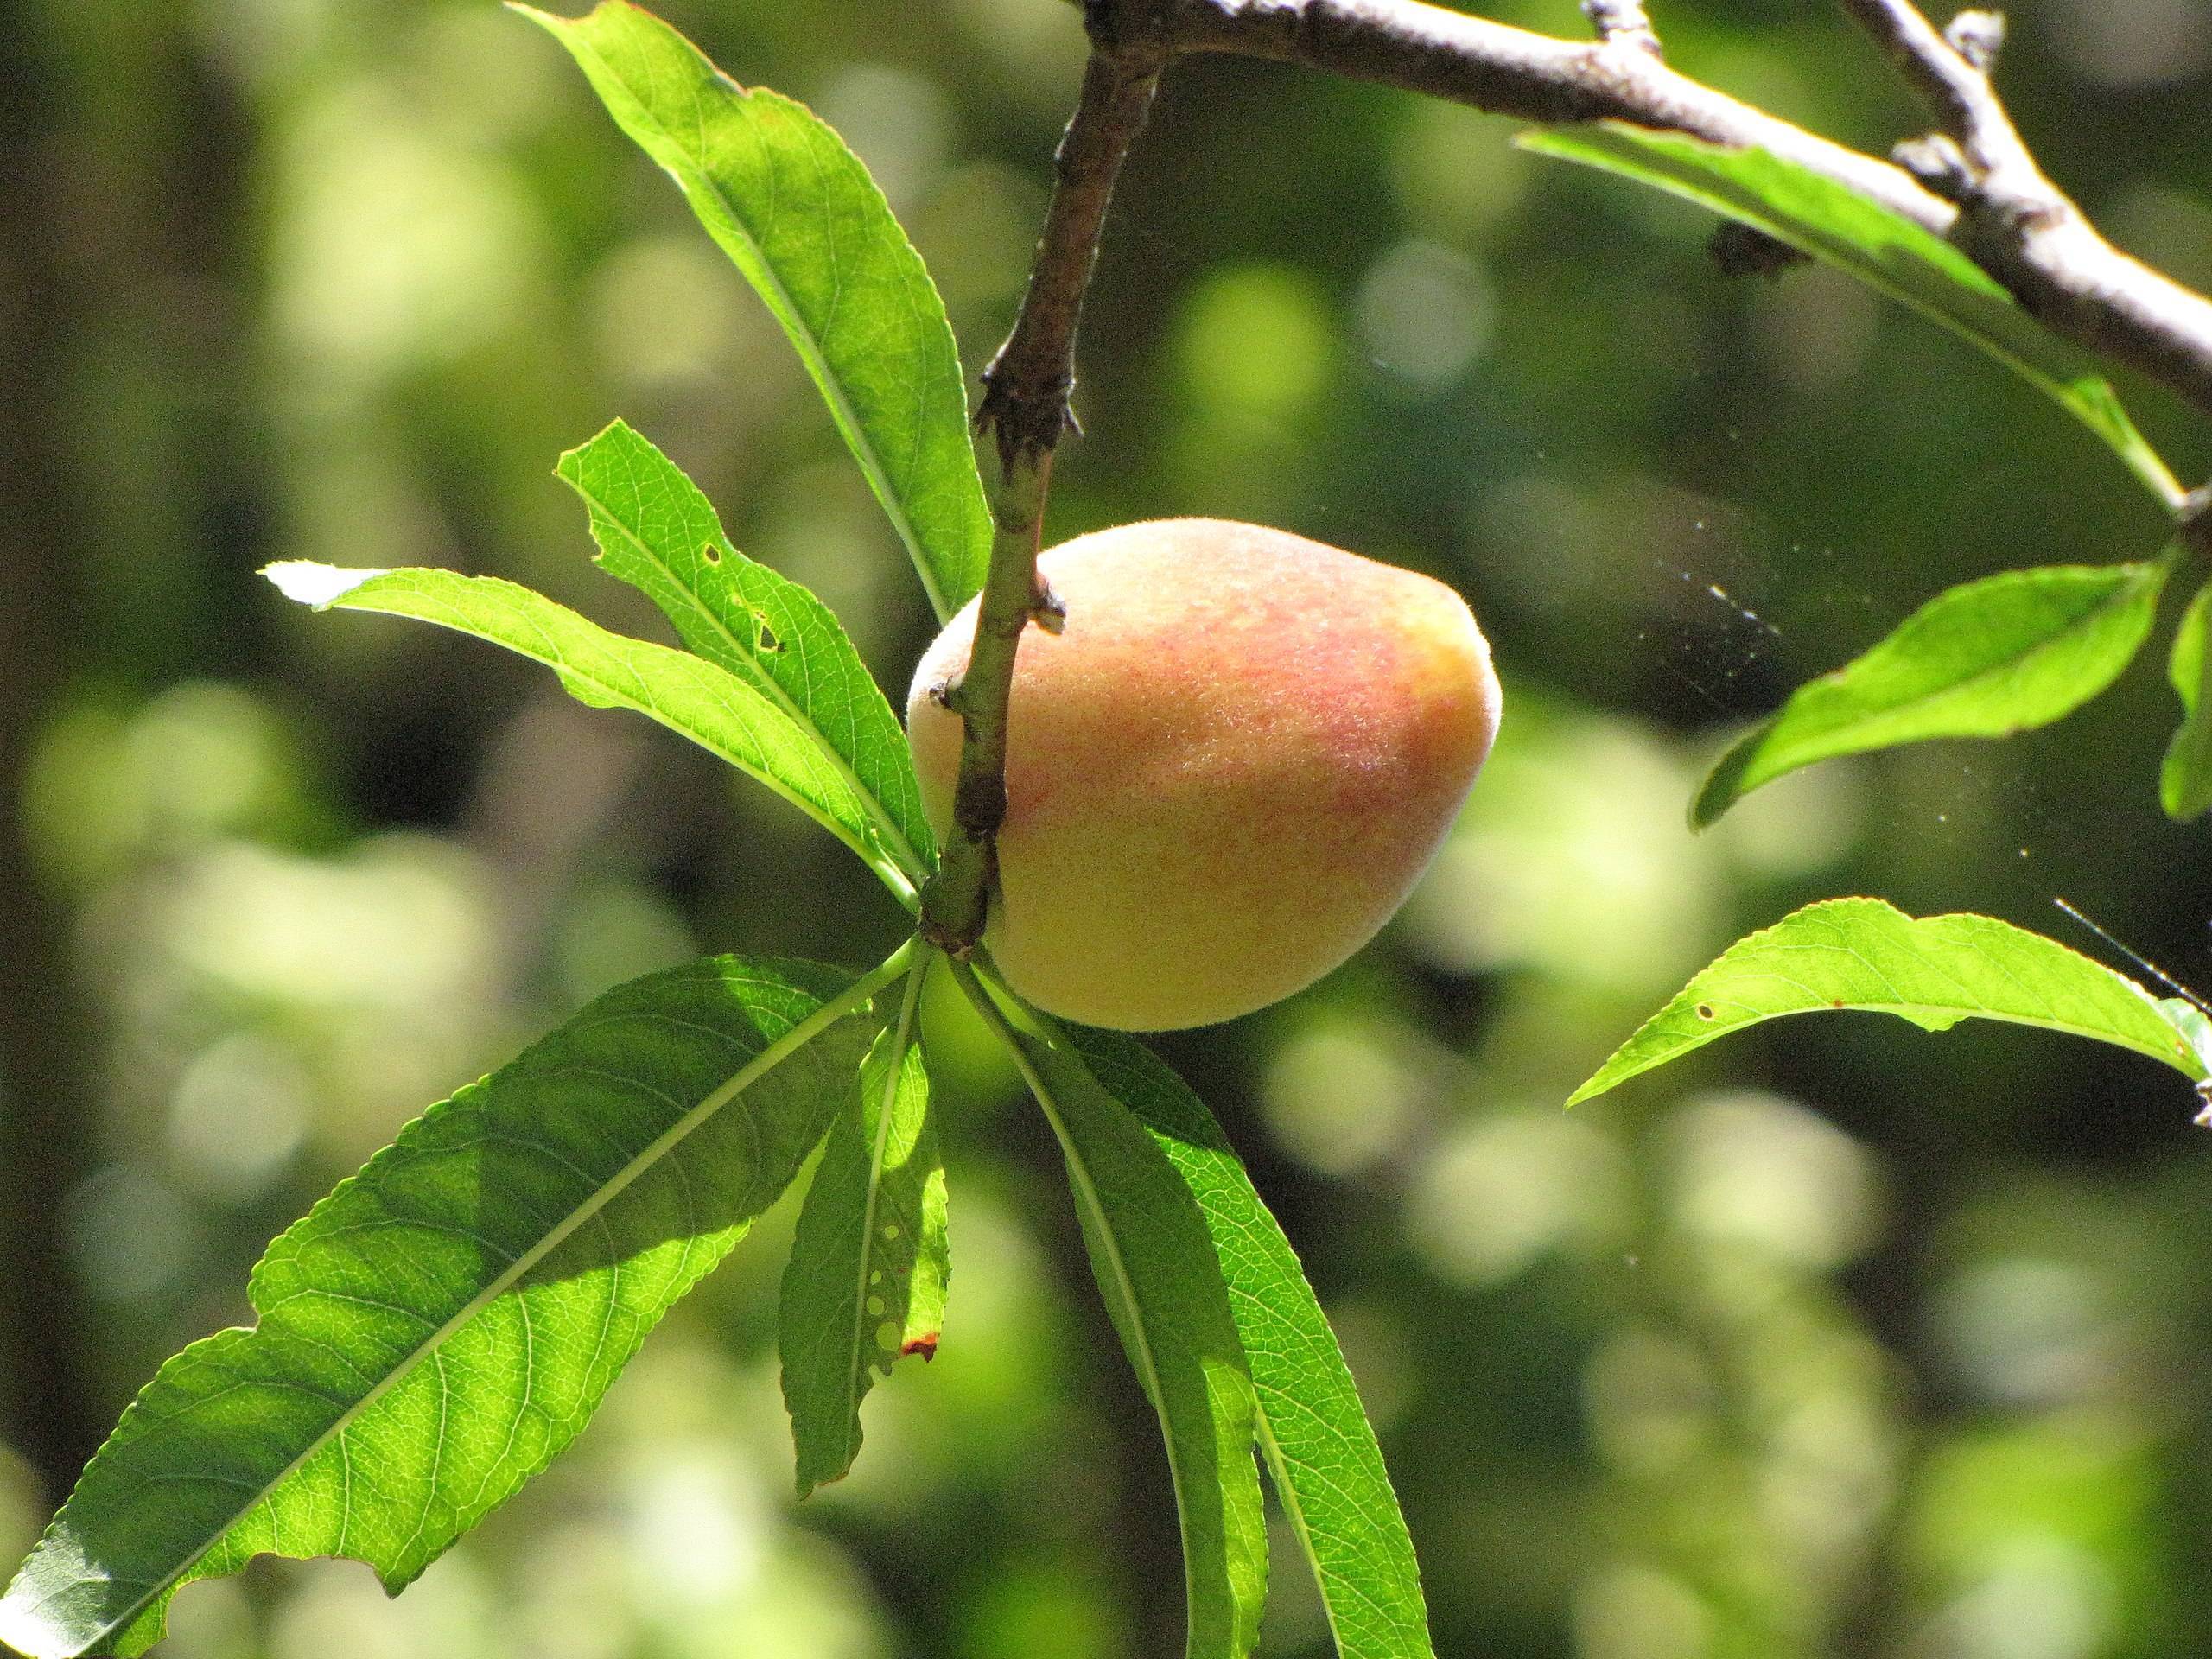 yellow-pink fruits with green leaves and green-brown branches